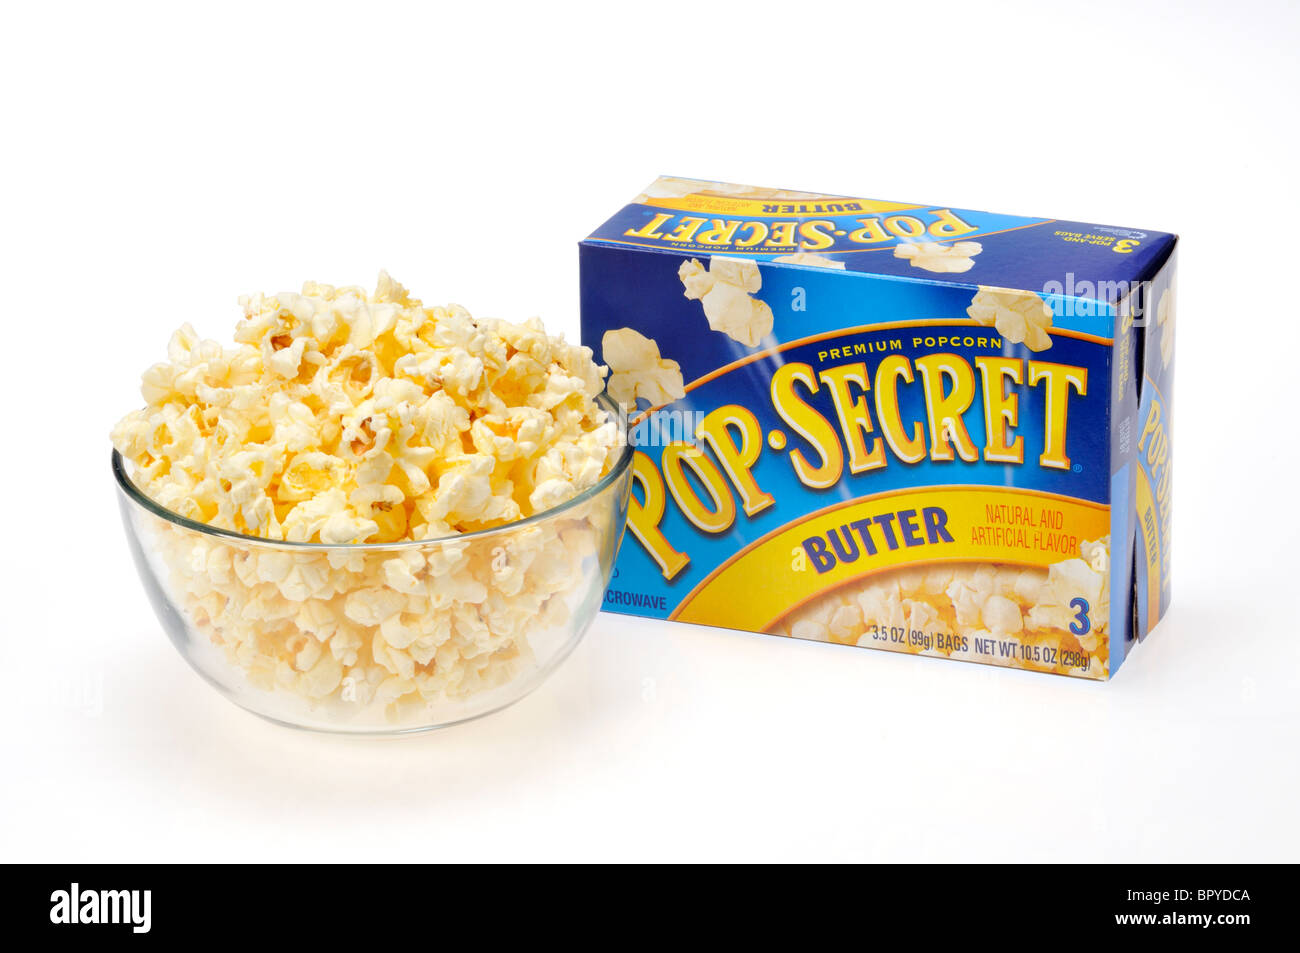 A glass bowl filled with microwave popcorn a box of Pop Secret popcorn behind it on white background, cut out. Stock Photo